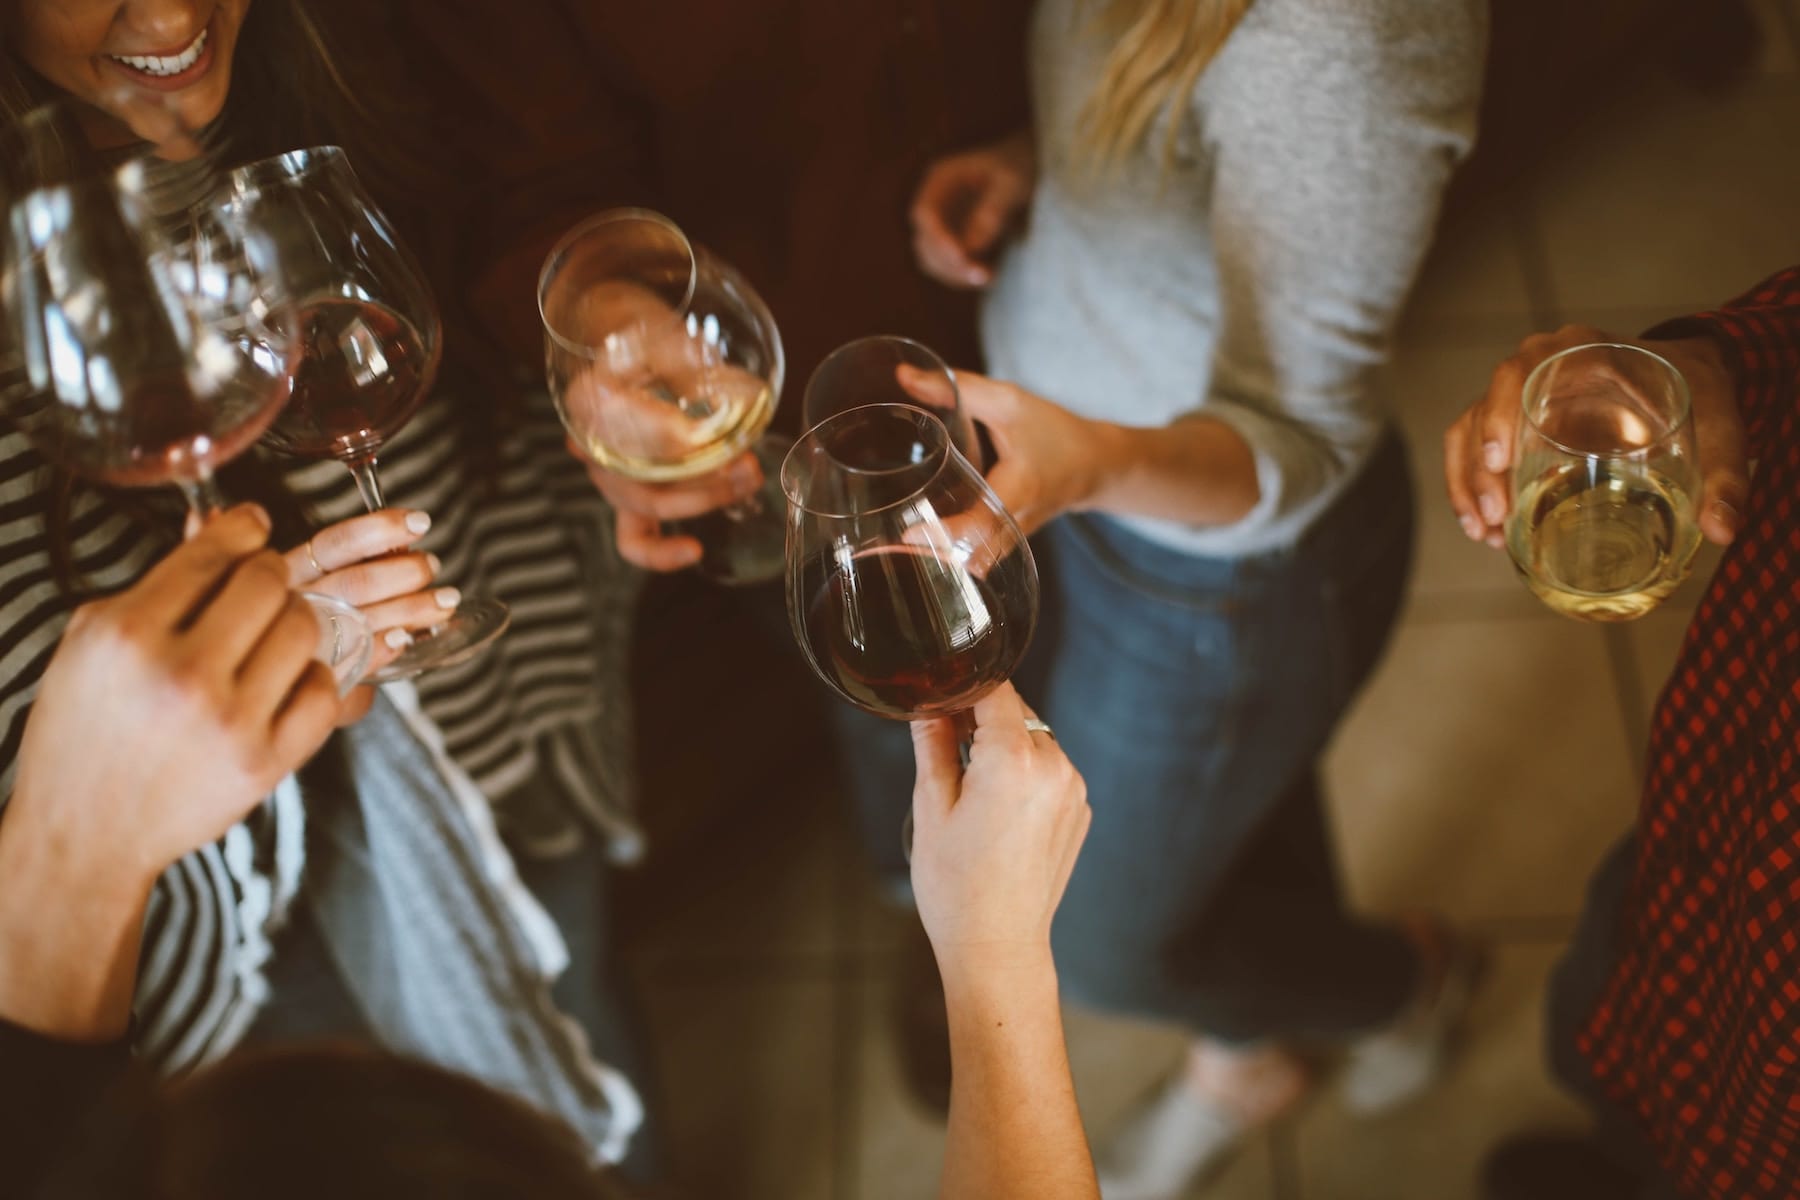 WSET's Wine Education Week comes to Hertfordshire